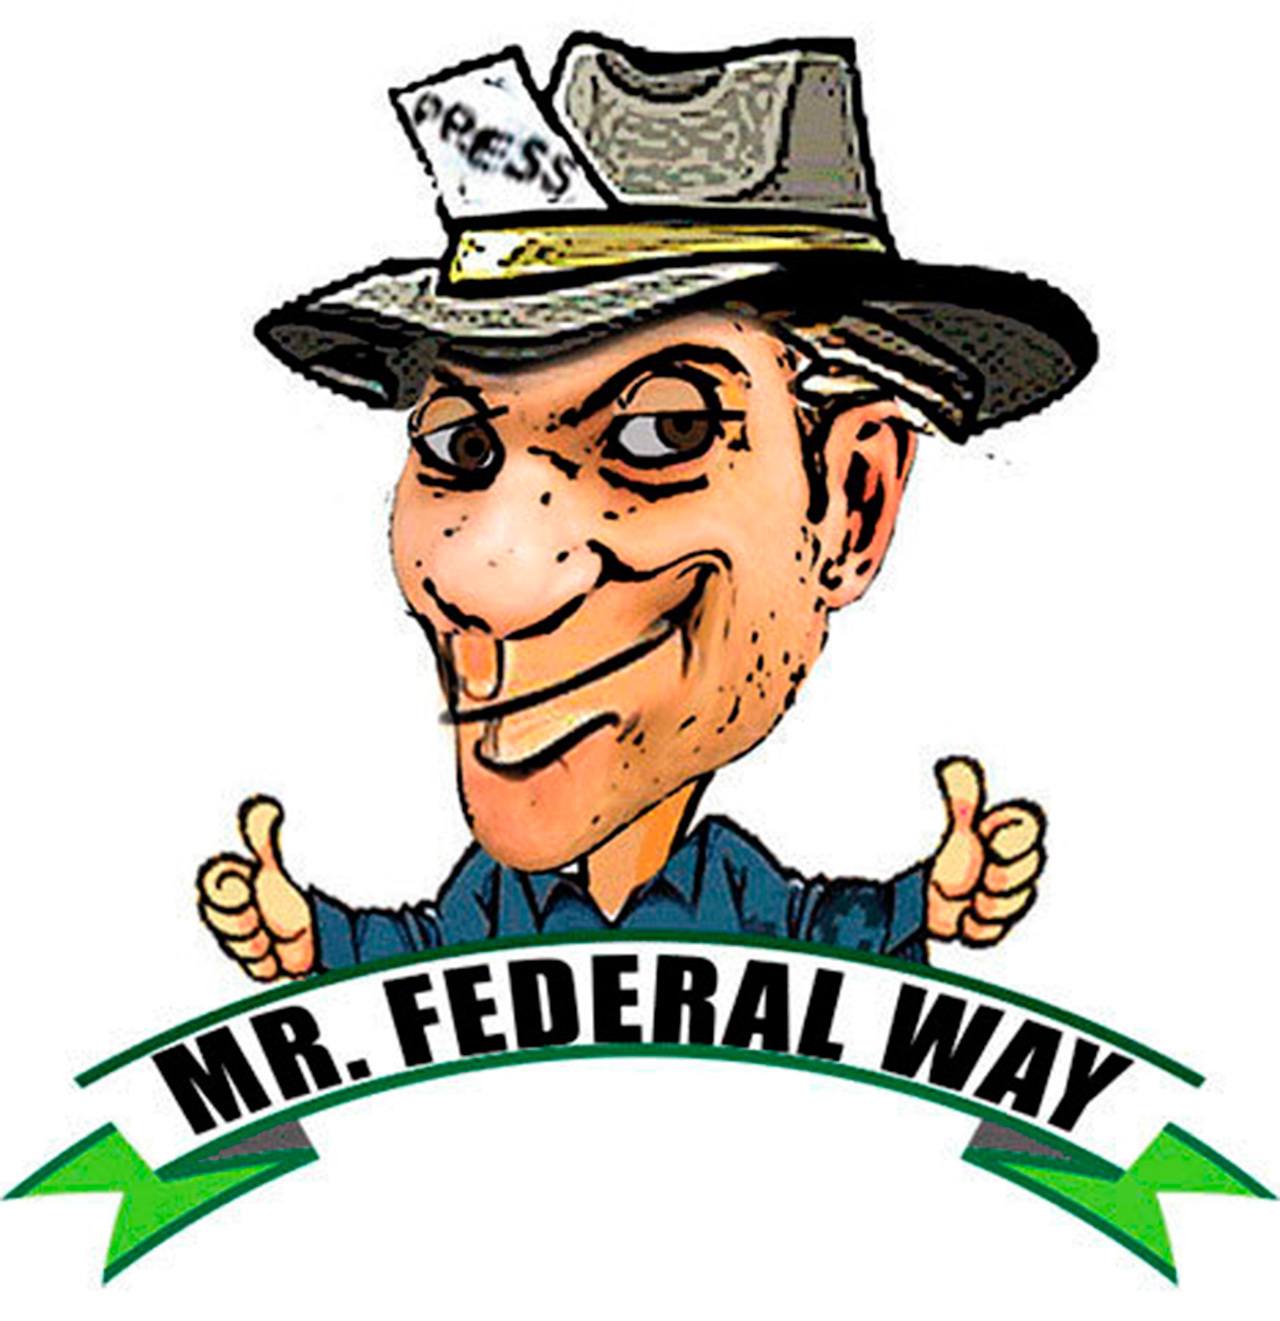 Stormageddon ‘16 and technical schools | Q&A with Mr. Federal Way